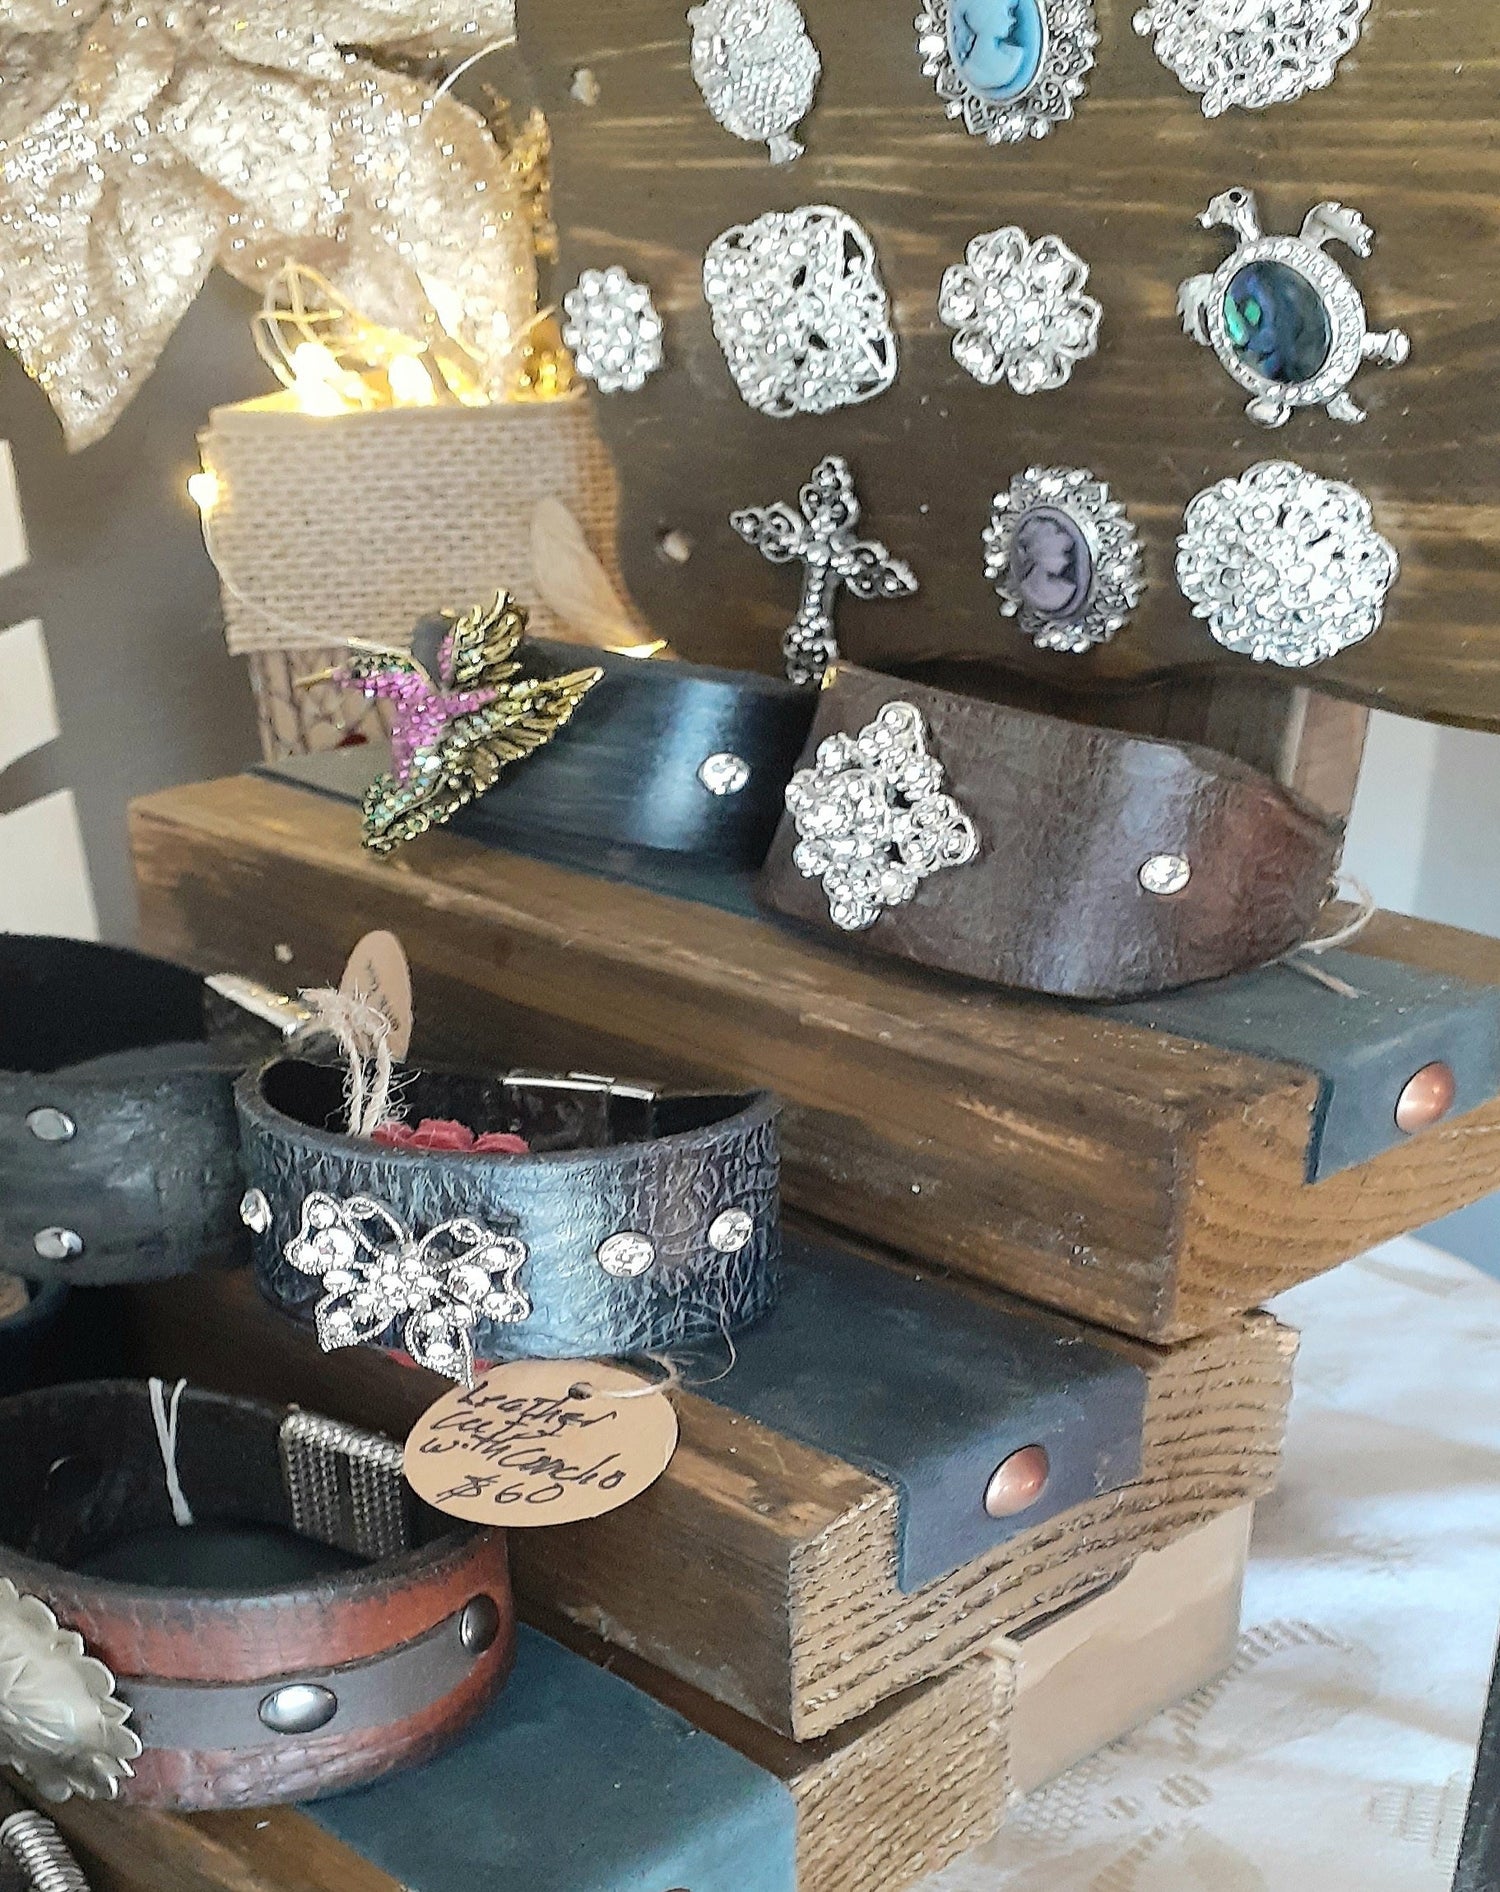 Leather Cuffs and large Display |WRD - WarmRainyDay